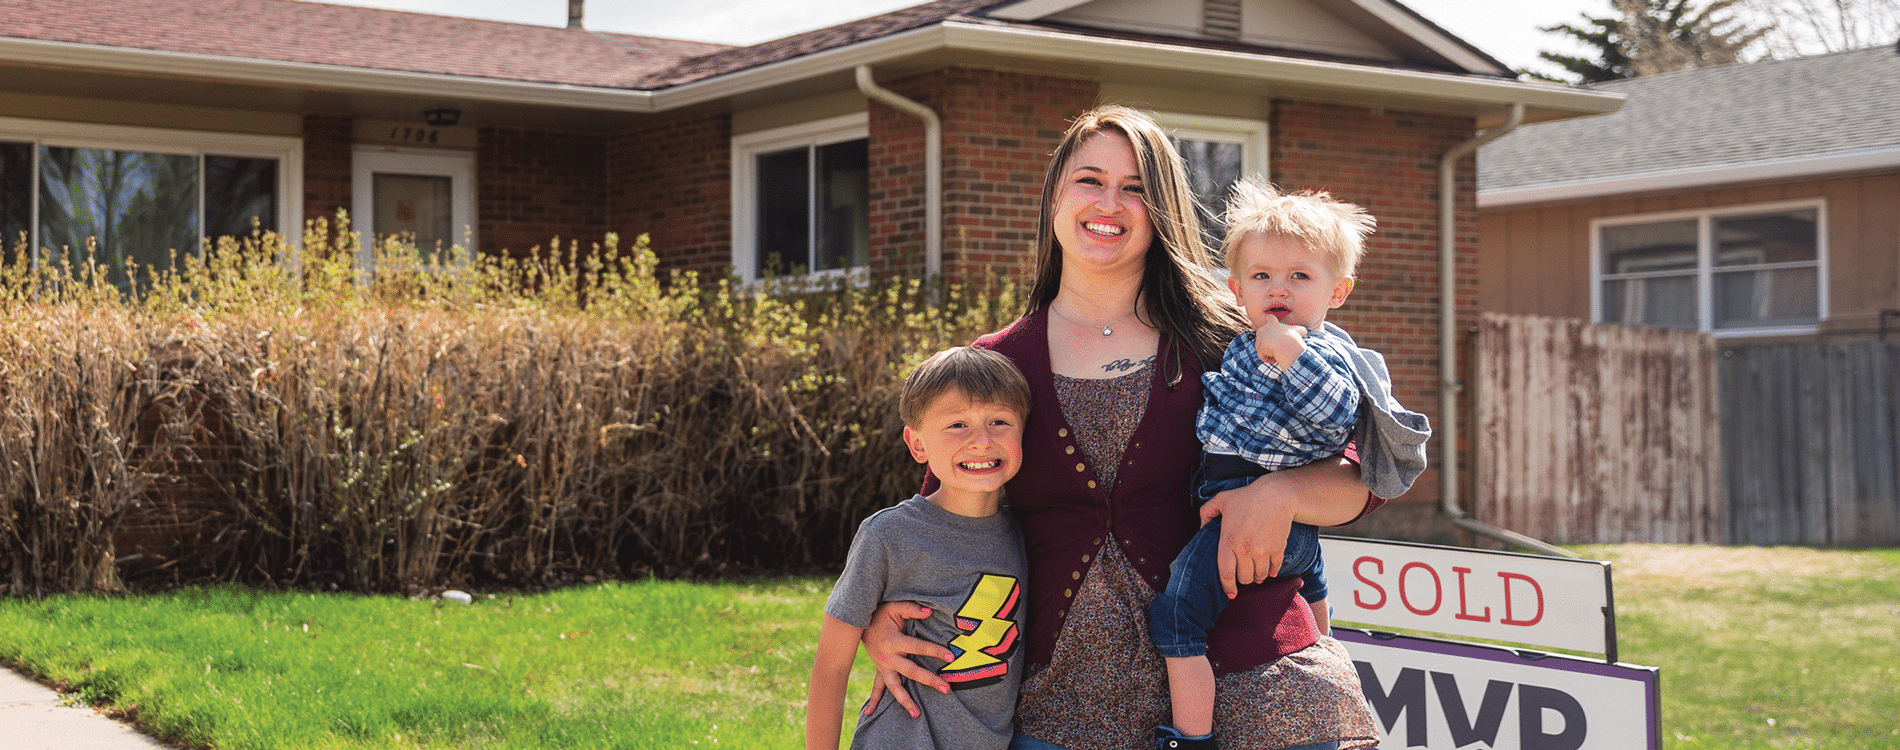 Shining On: The Future is Bright for Wyoming Families